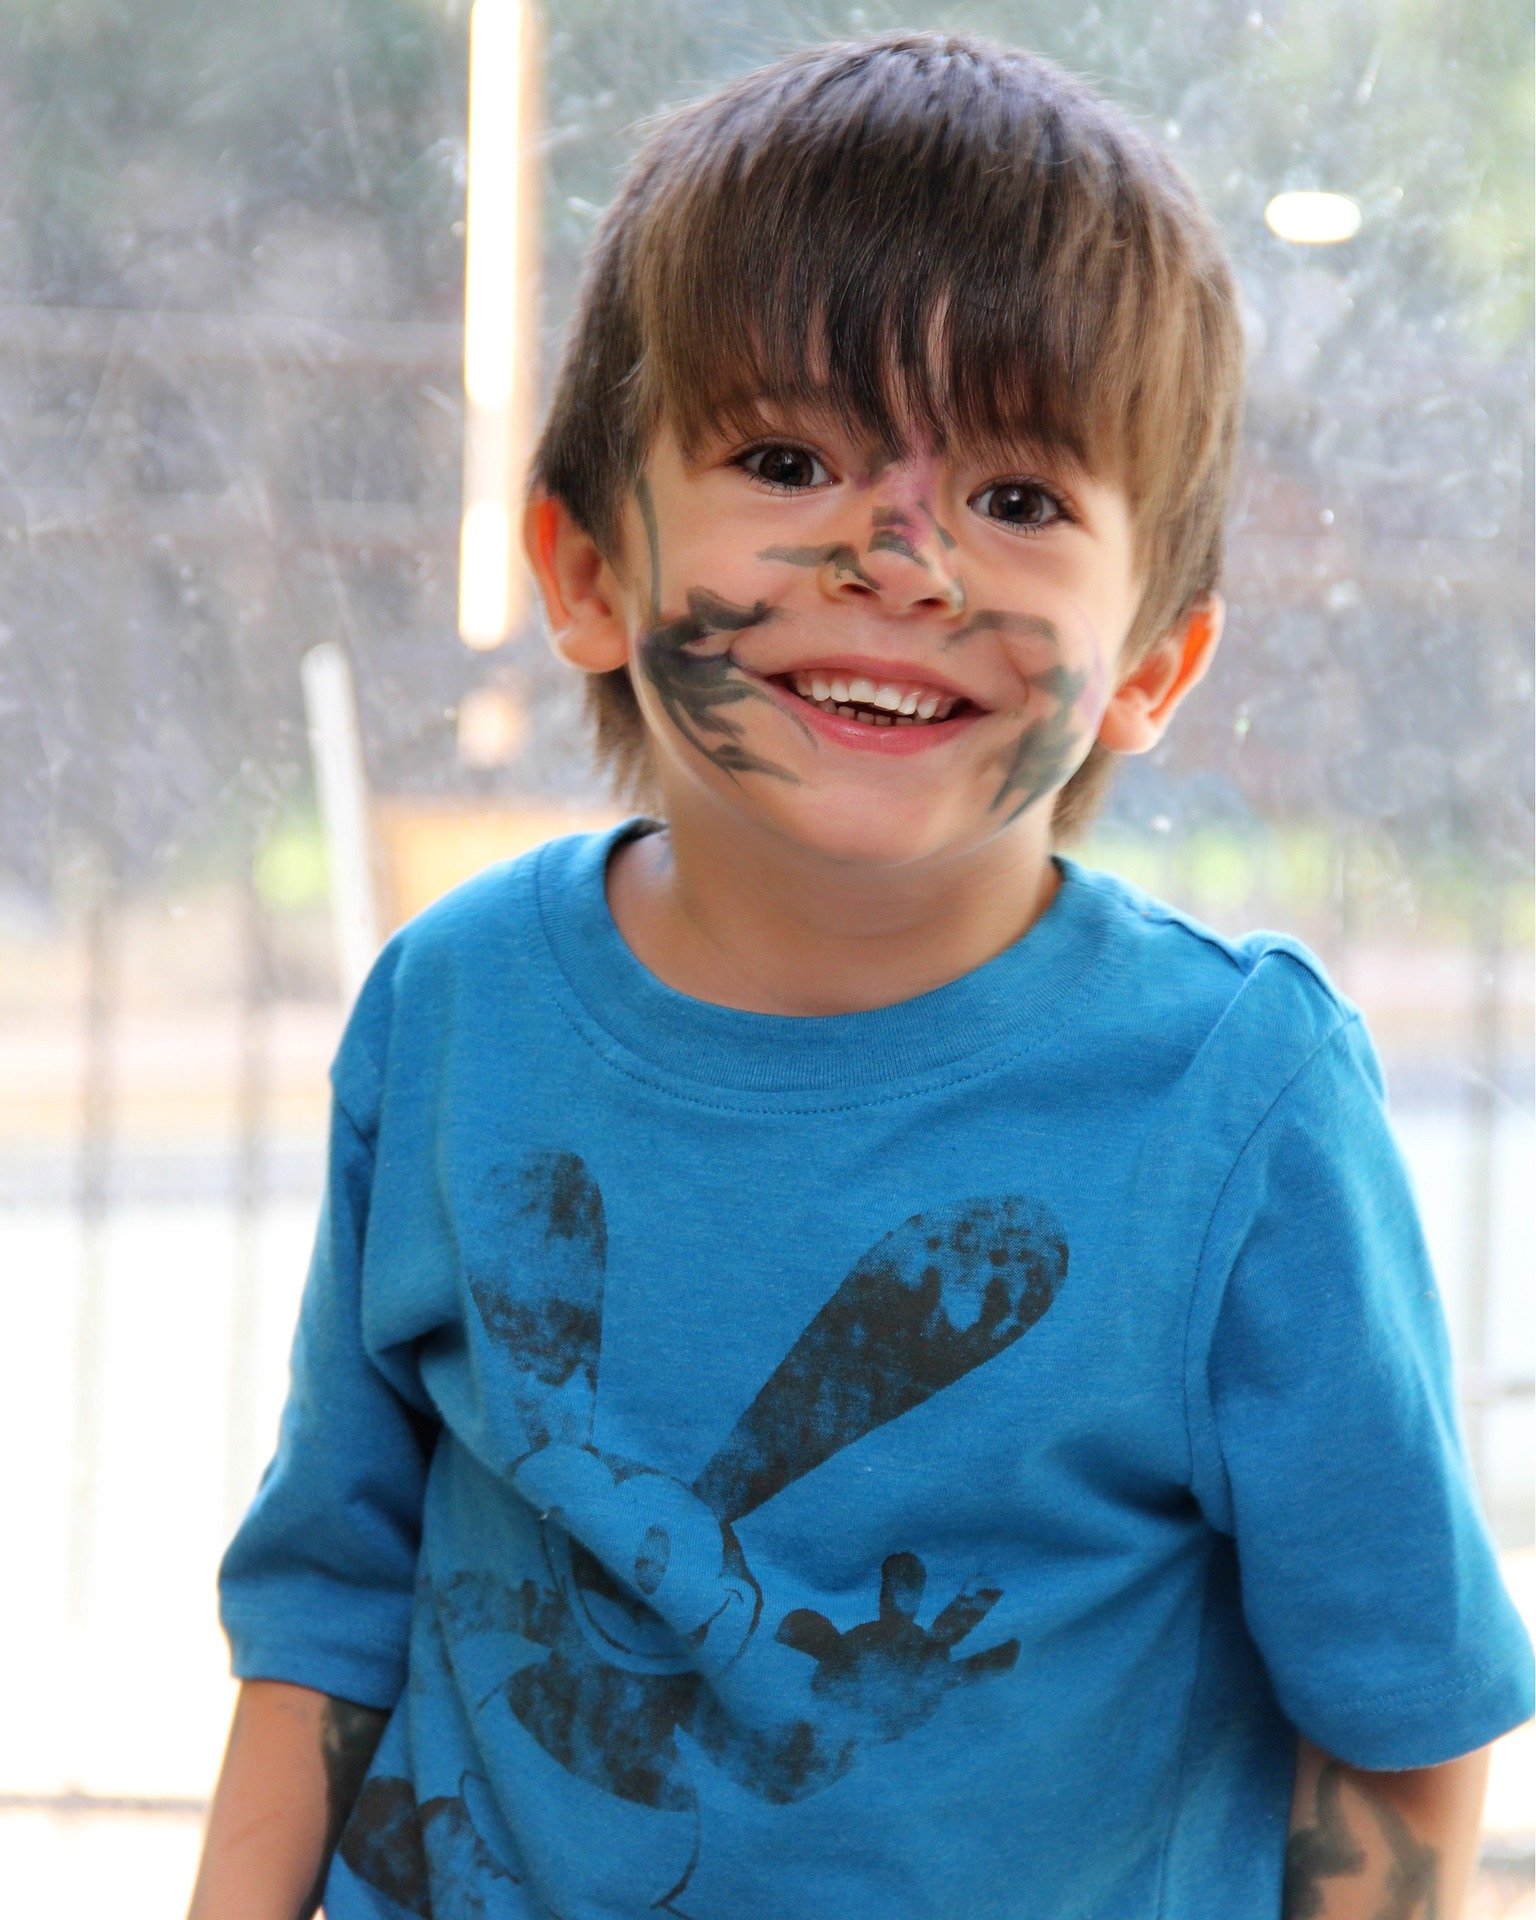 Pictured - A little boy with ink prints on his face smiles while having fun | Source: Pixabay 